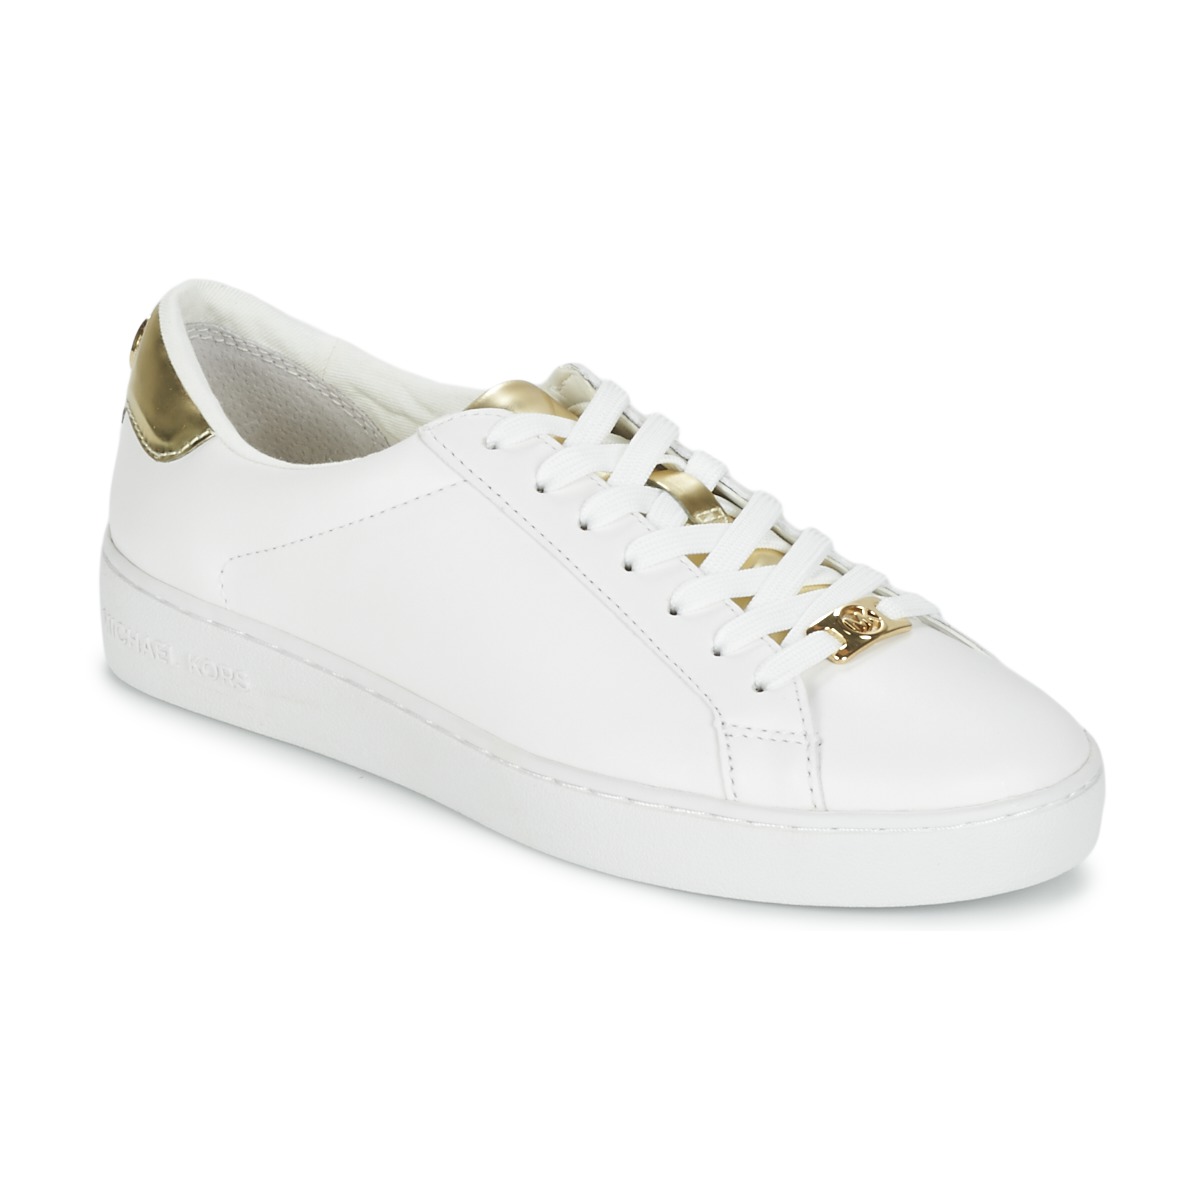 MICHAEL KORS Colorblock leather shell and suede sneakers  Sale up to 70  off  THE OUTNET